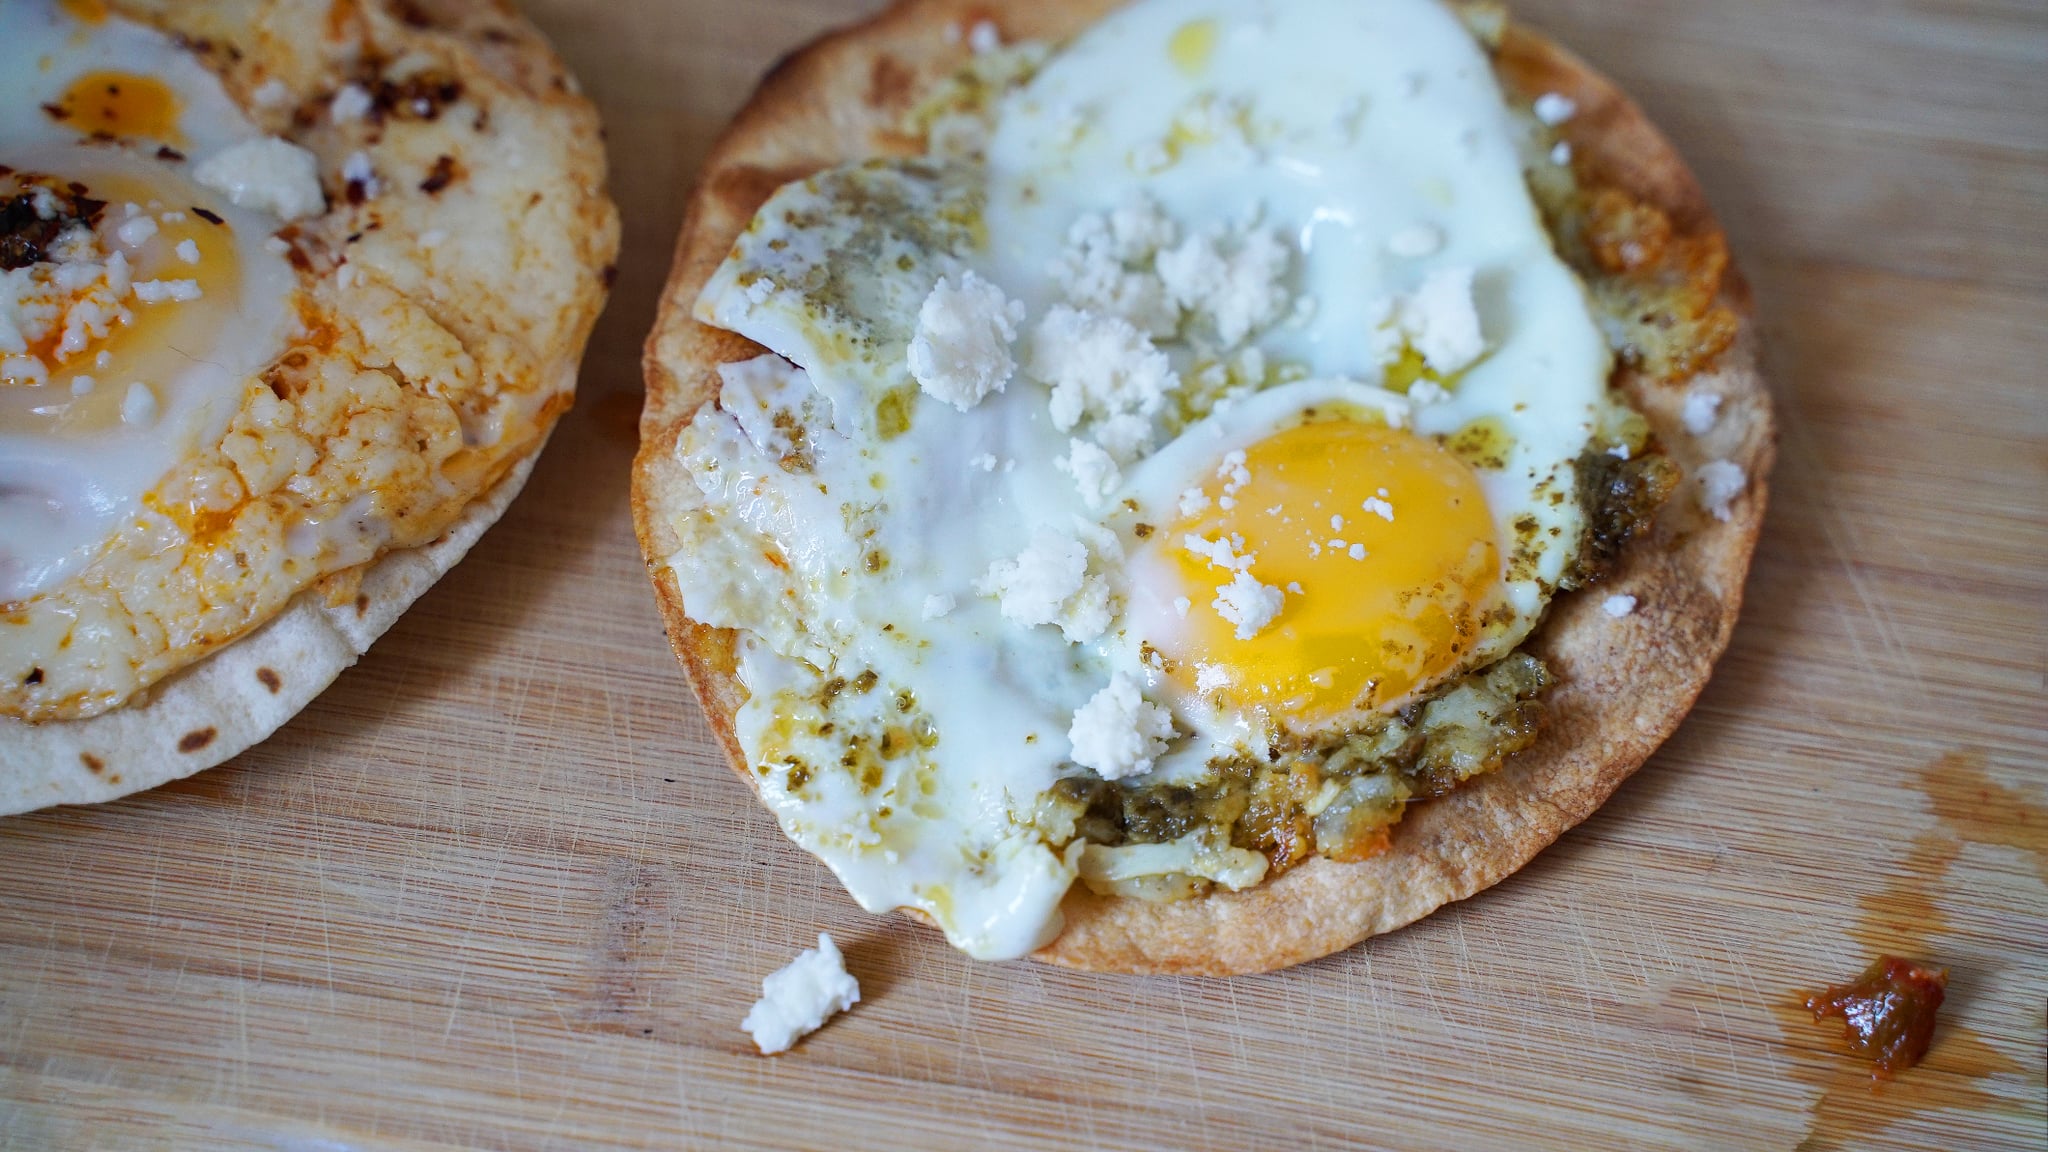 This Protein-Packed TikTok Feta Fried Egg Recipe Needs Just 2 Ingredients  and Takes 5 Minutes to Make